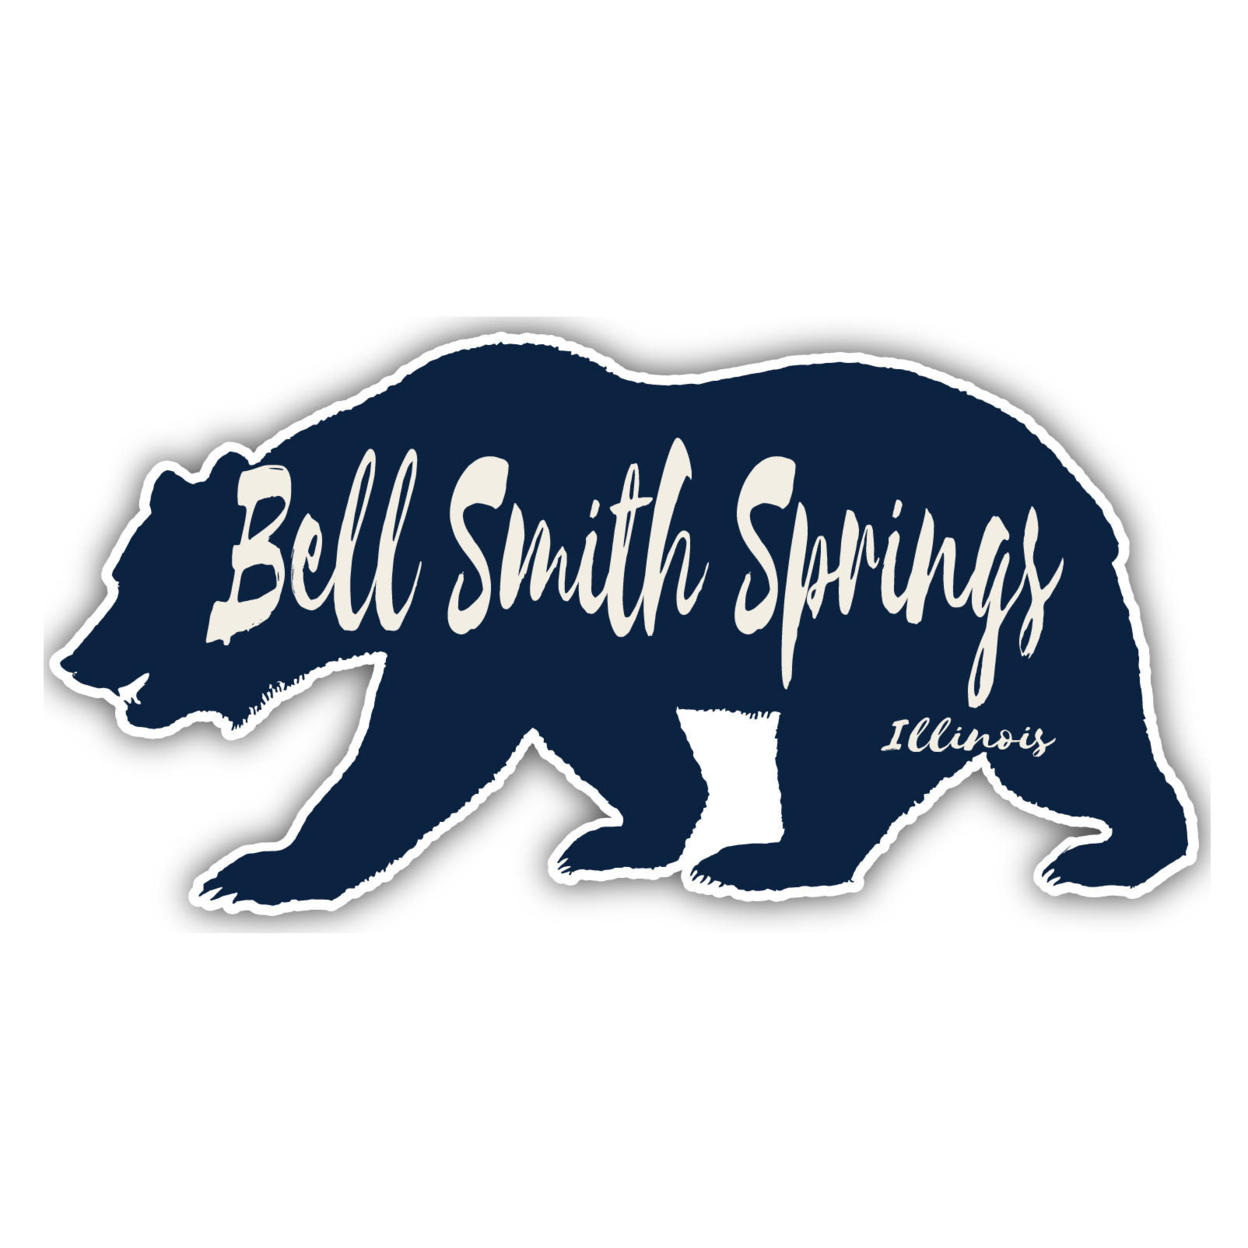 Bell Smith Springs Illinois Souvenir Decorative Stickers (Choose Theme And Size) - Single Unit, 6-Inch, Camp Life